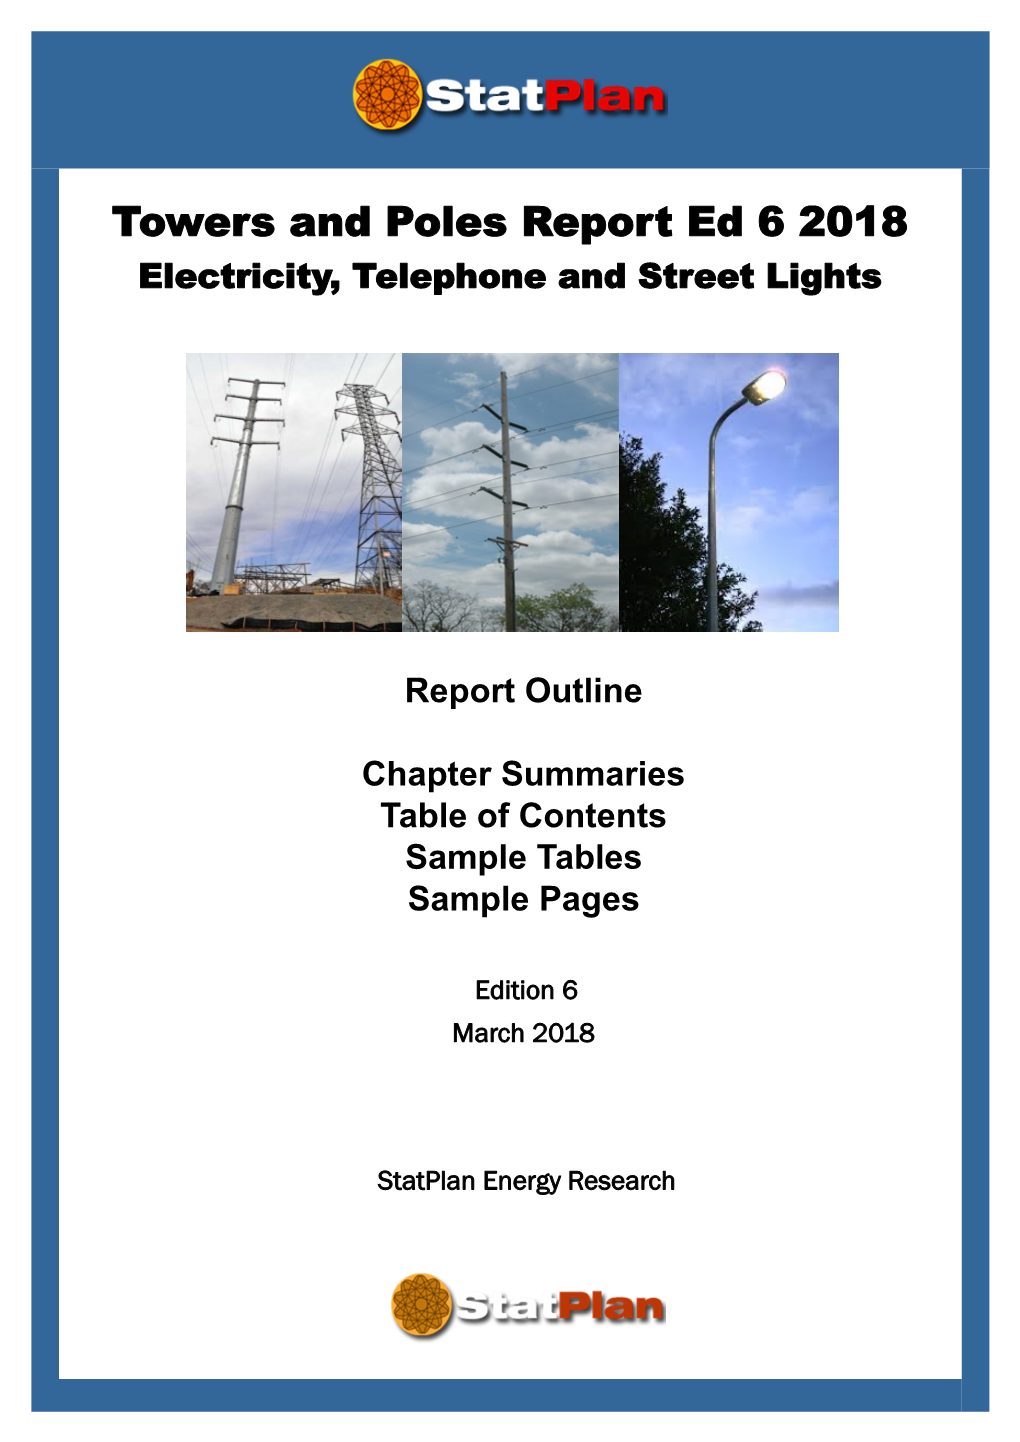 Towers and Poles Report Ed 6 2018 Electricity, Telephone and Street Lights